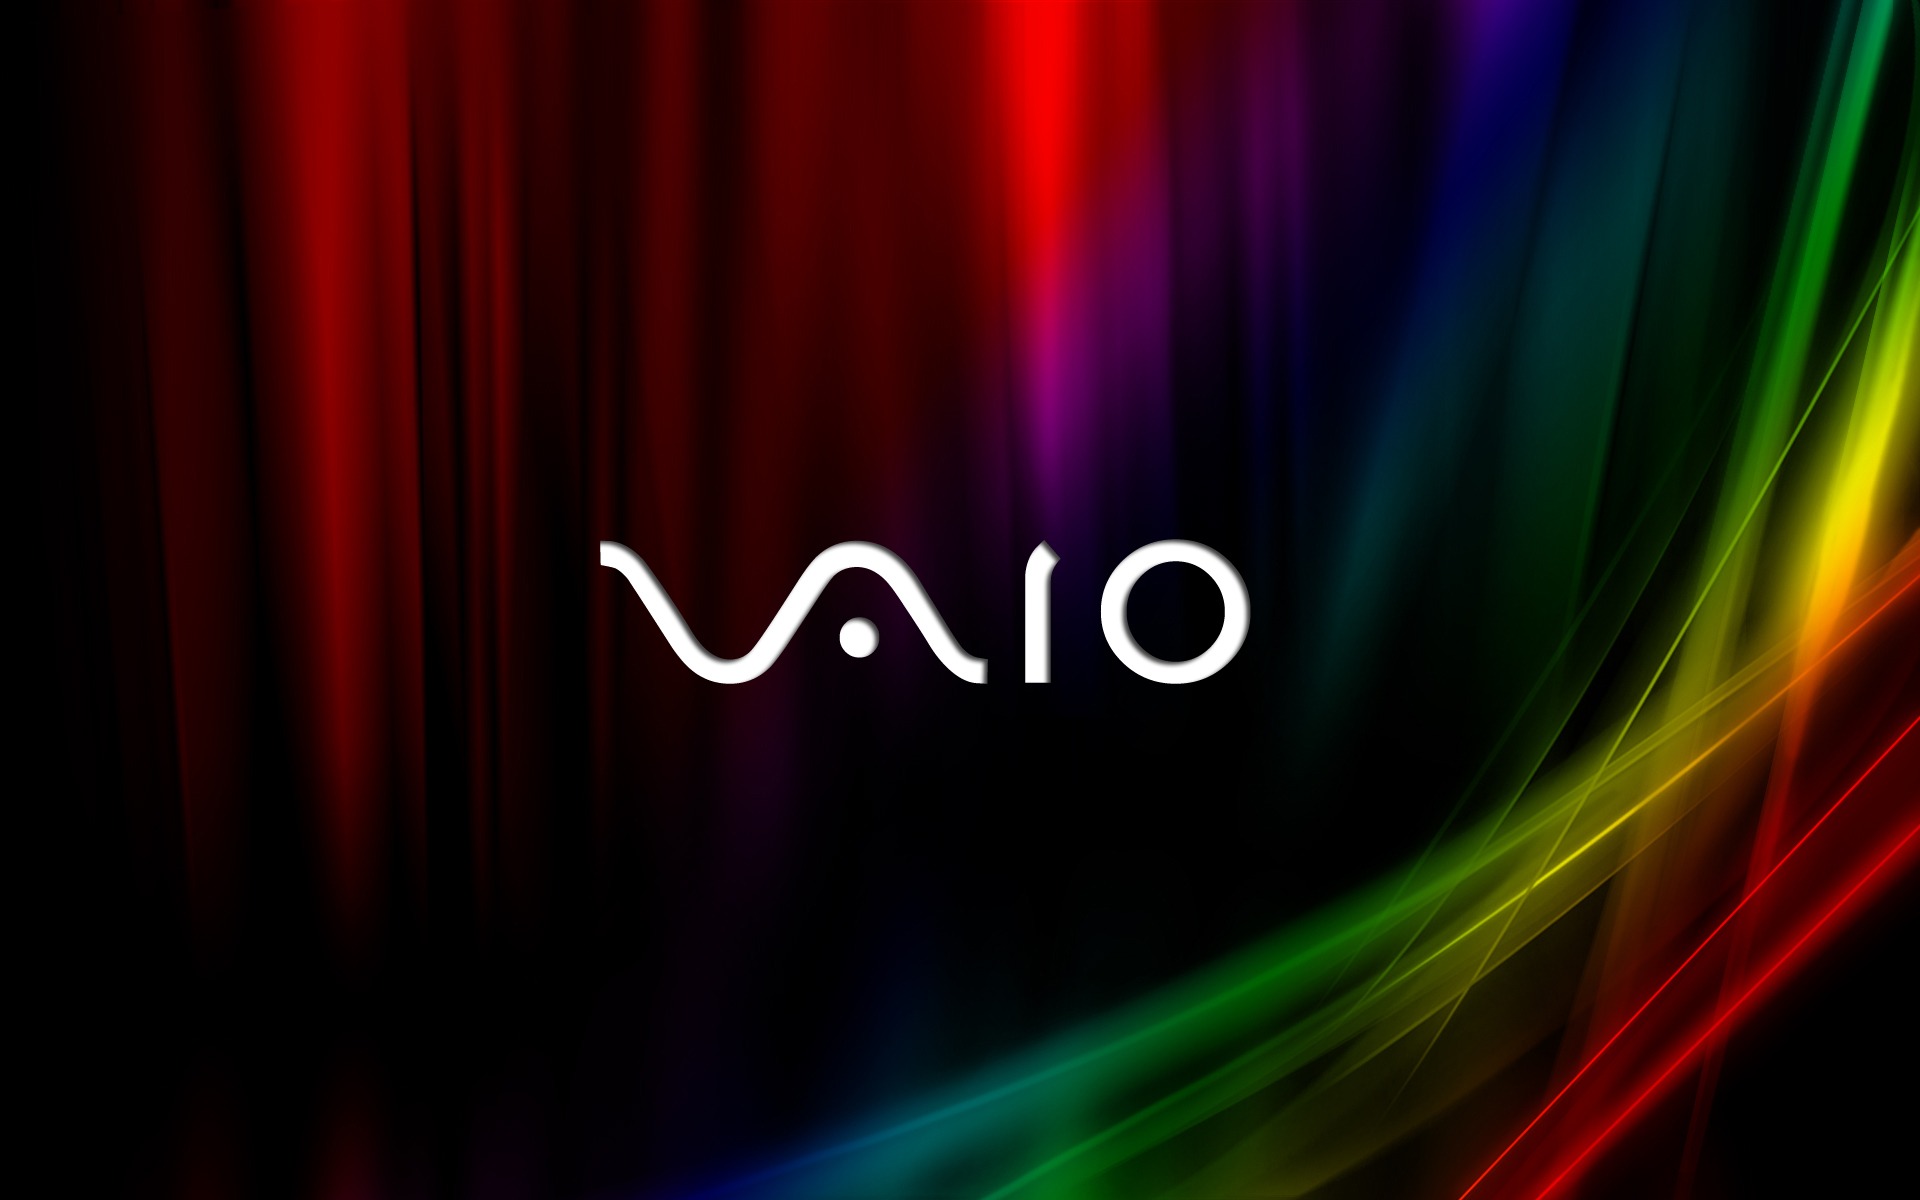 sony vaio wallpaper hd,green,light,violet,red,graphic design